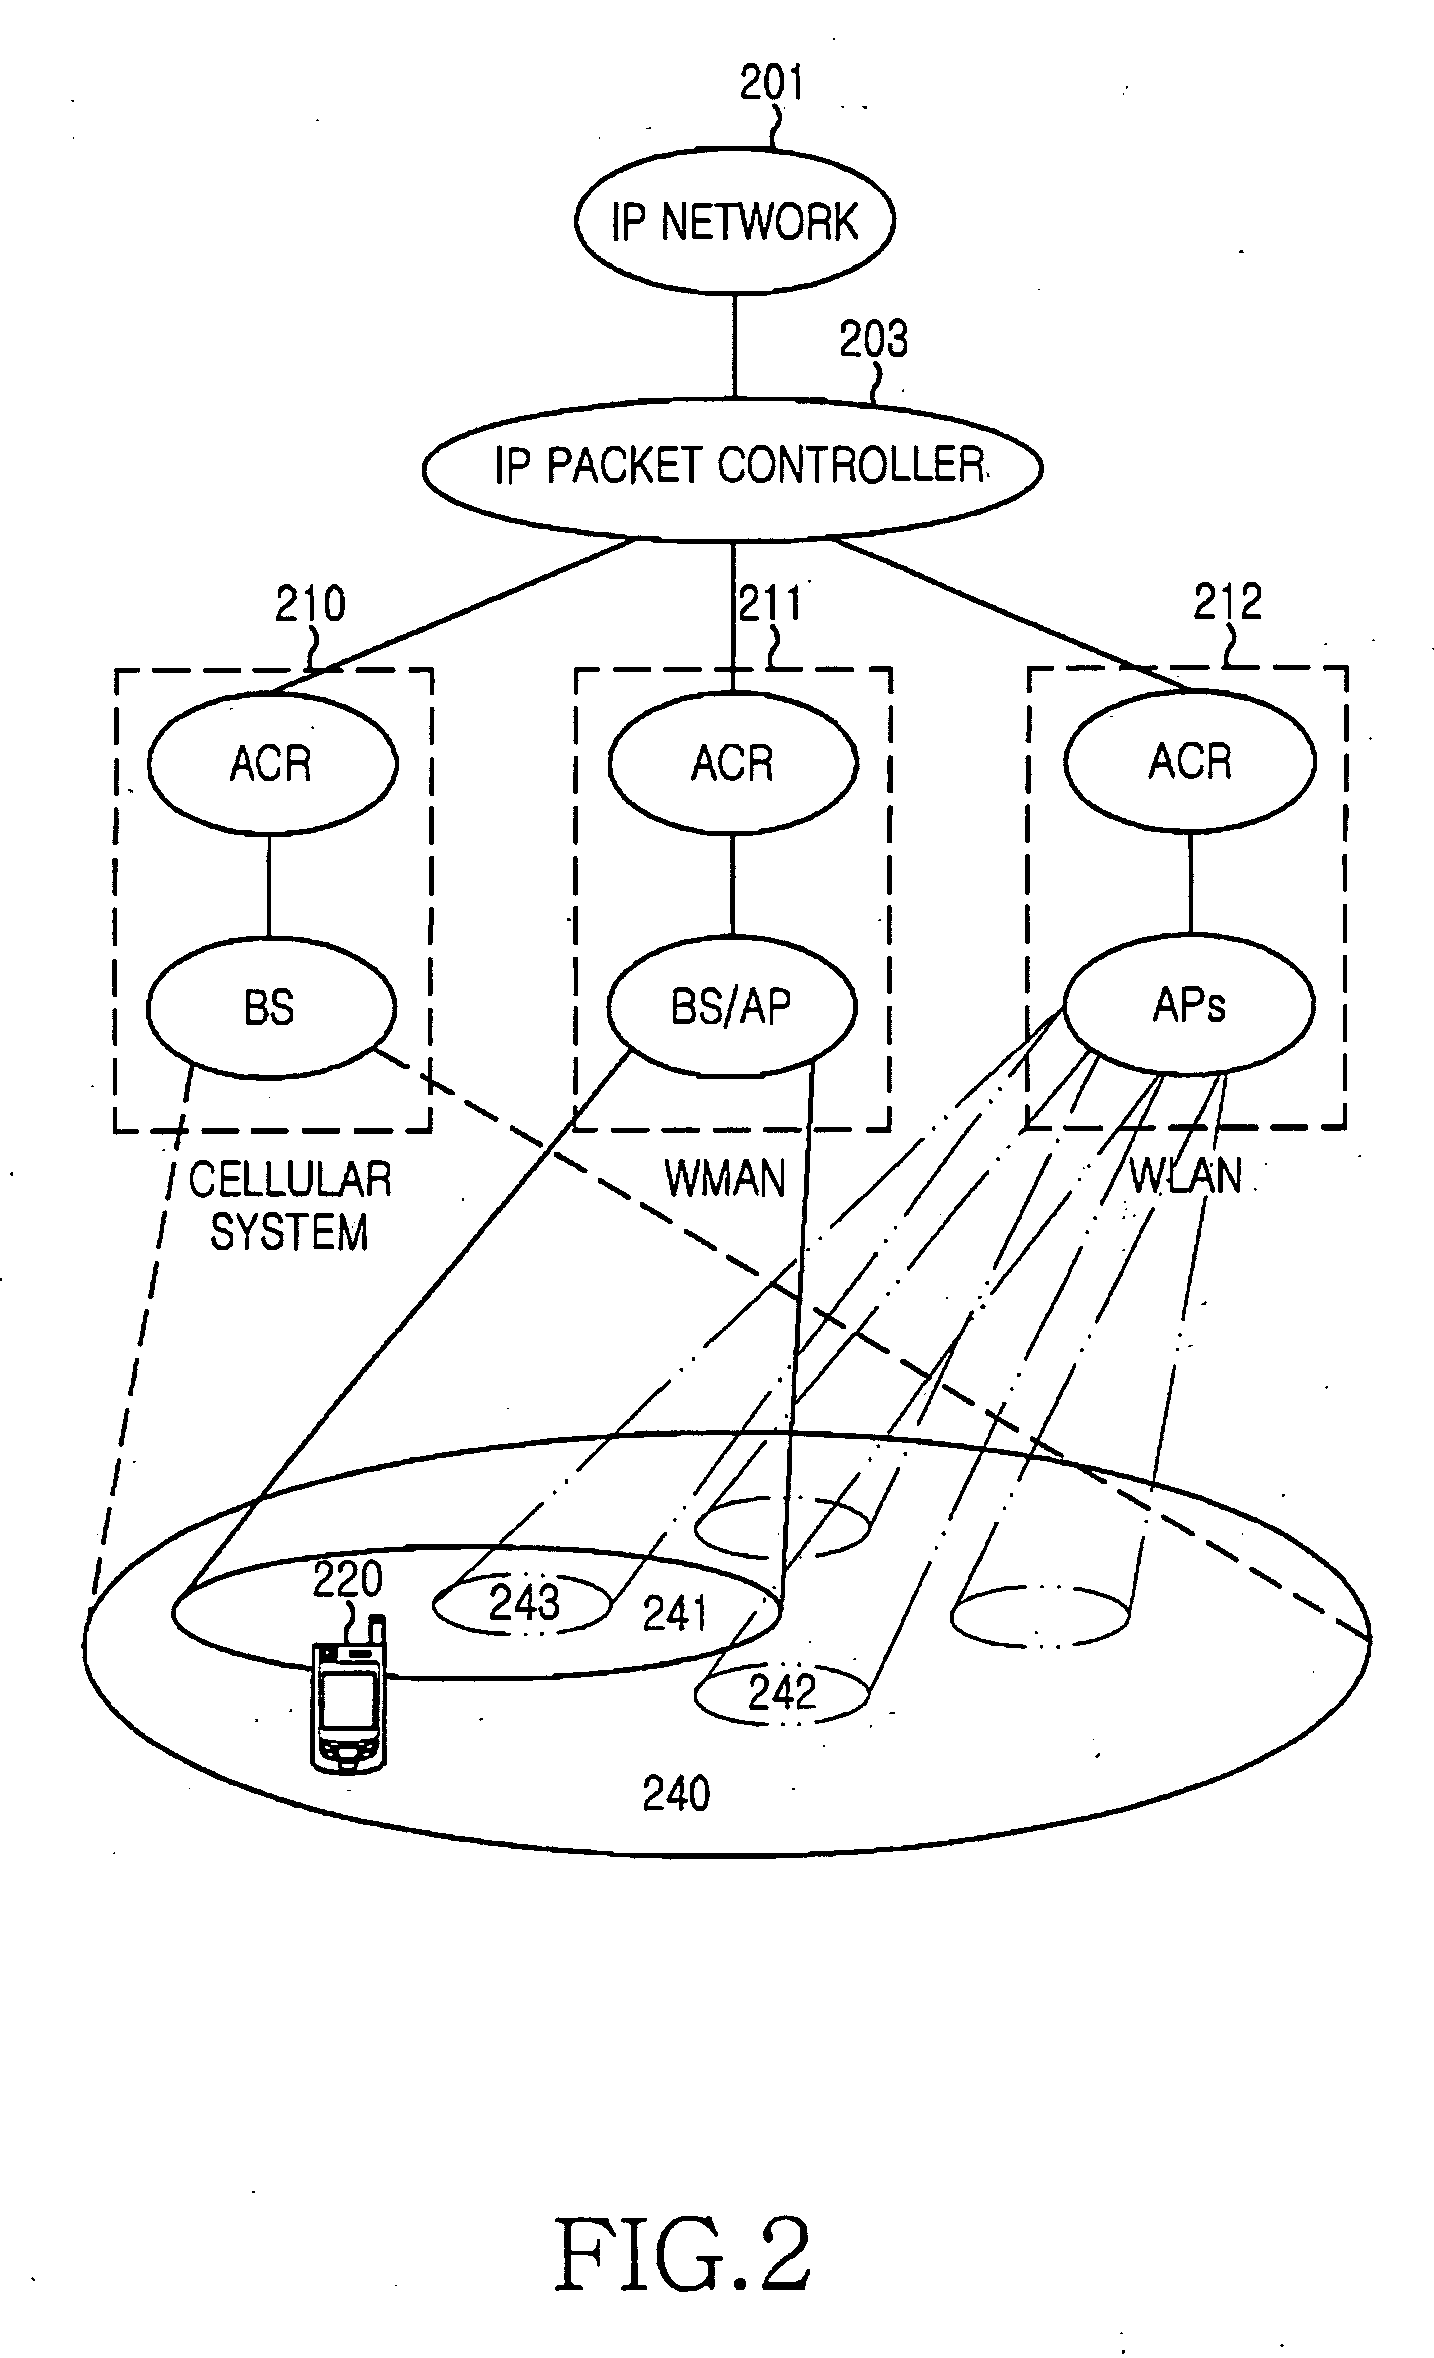 Data service apparatus and method in heterogeneous wireless networks